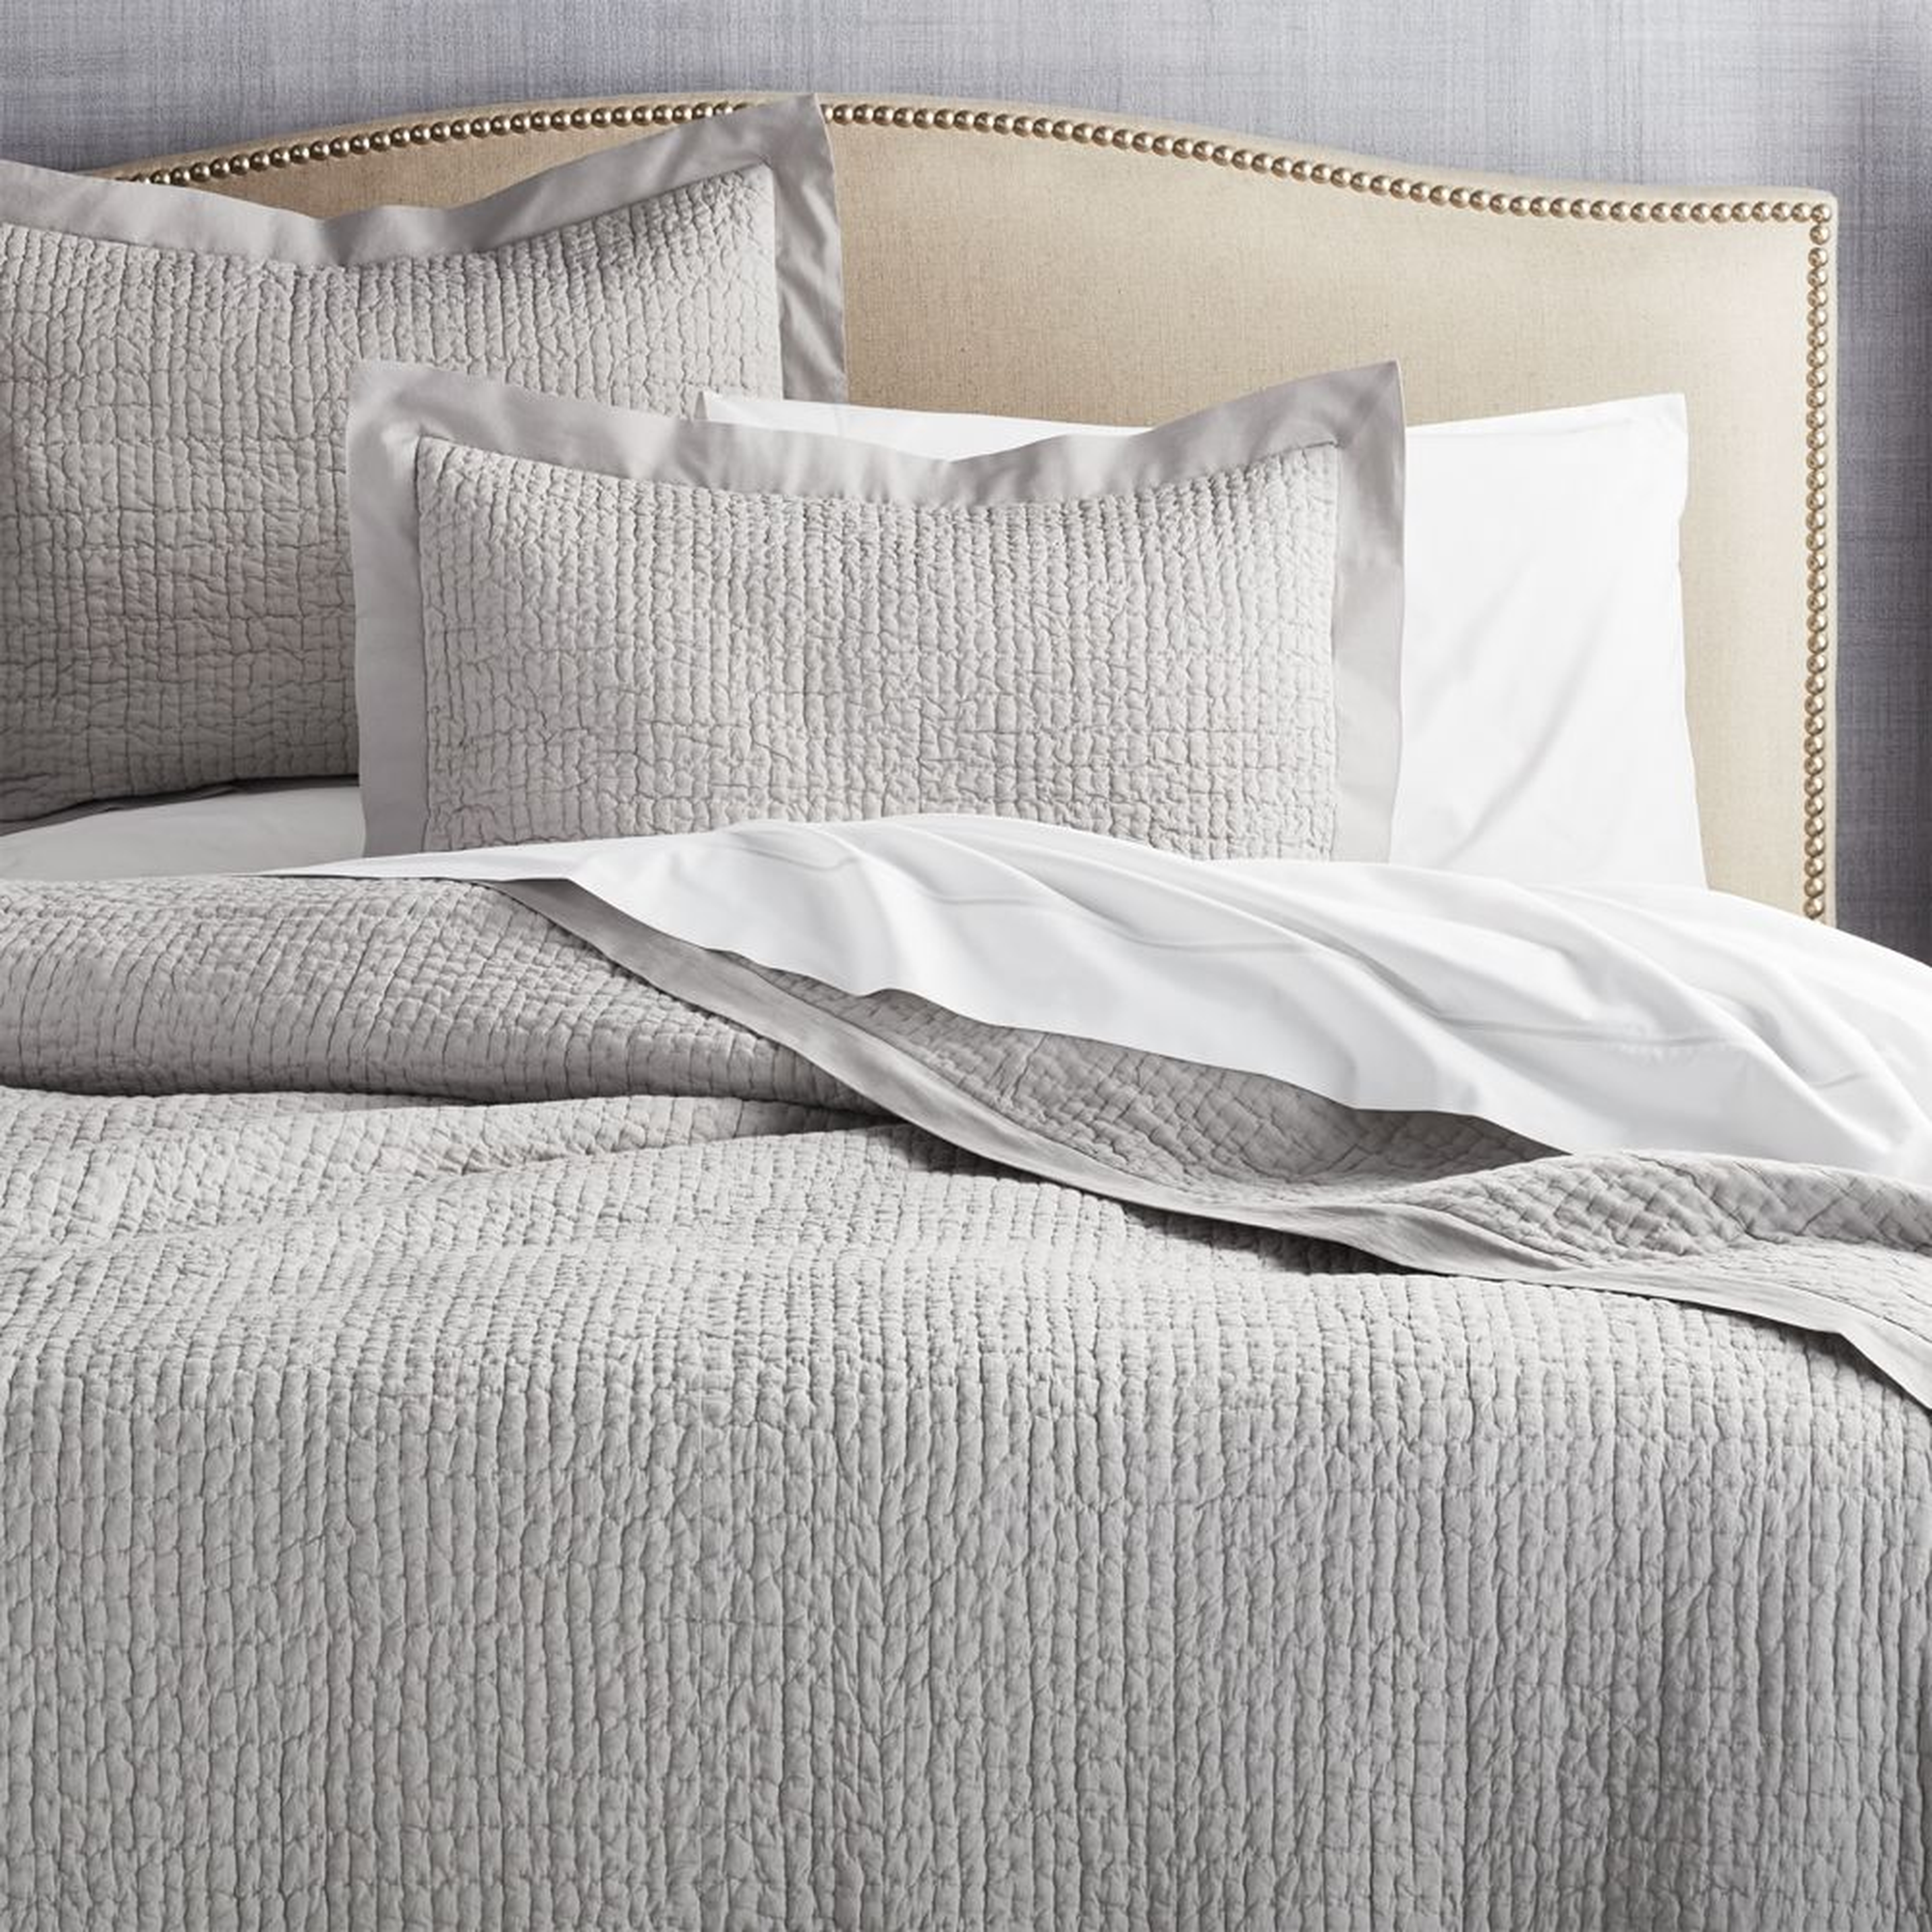 Celeste Grey Cotton Solid Quilt King - Crate and Barrel